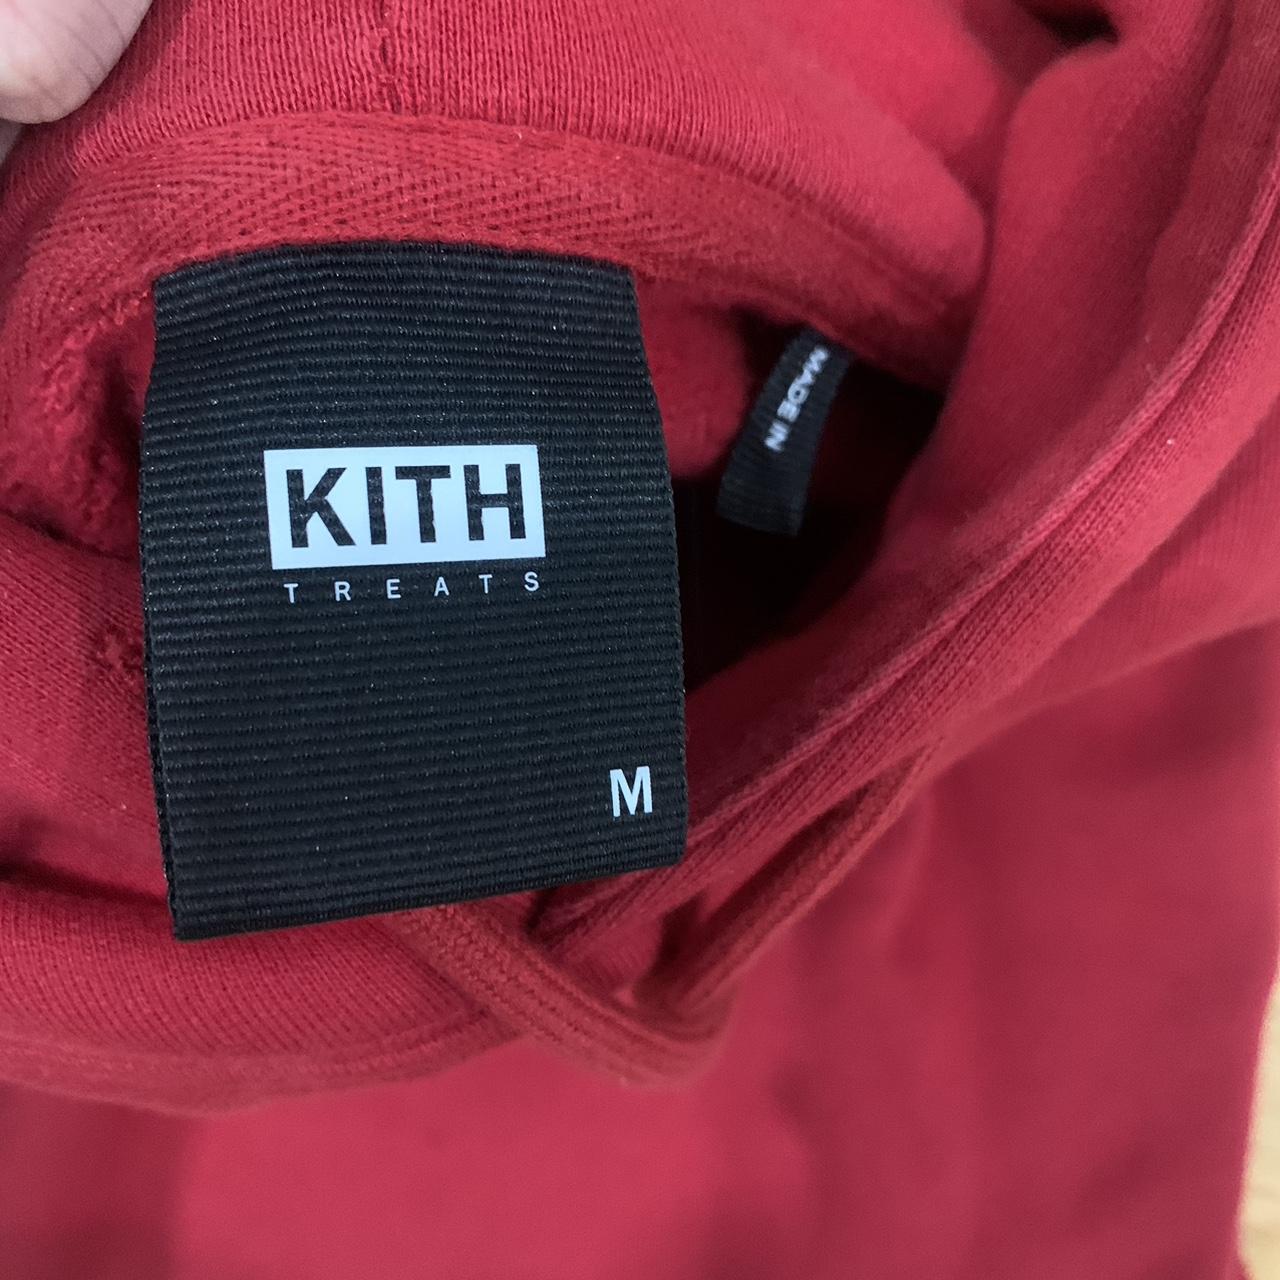 Kith Treats Lunar New Year Exclusive Hoodie size... - Depop